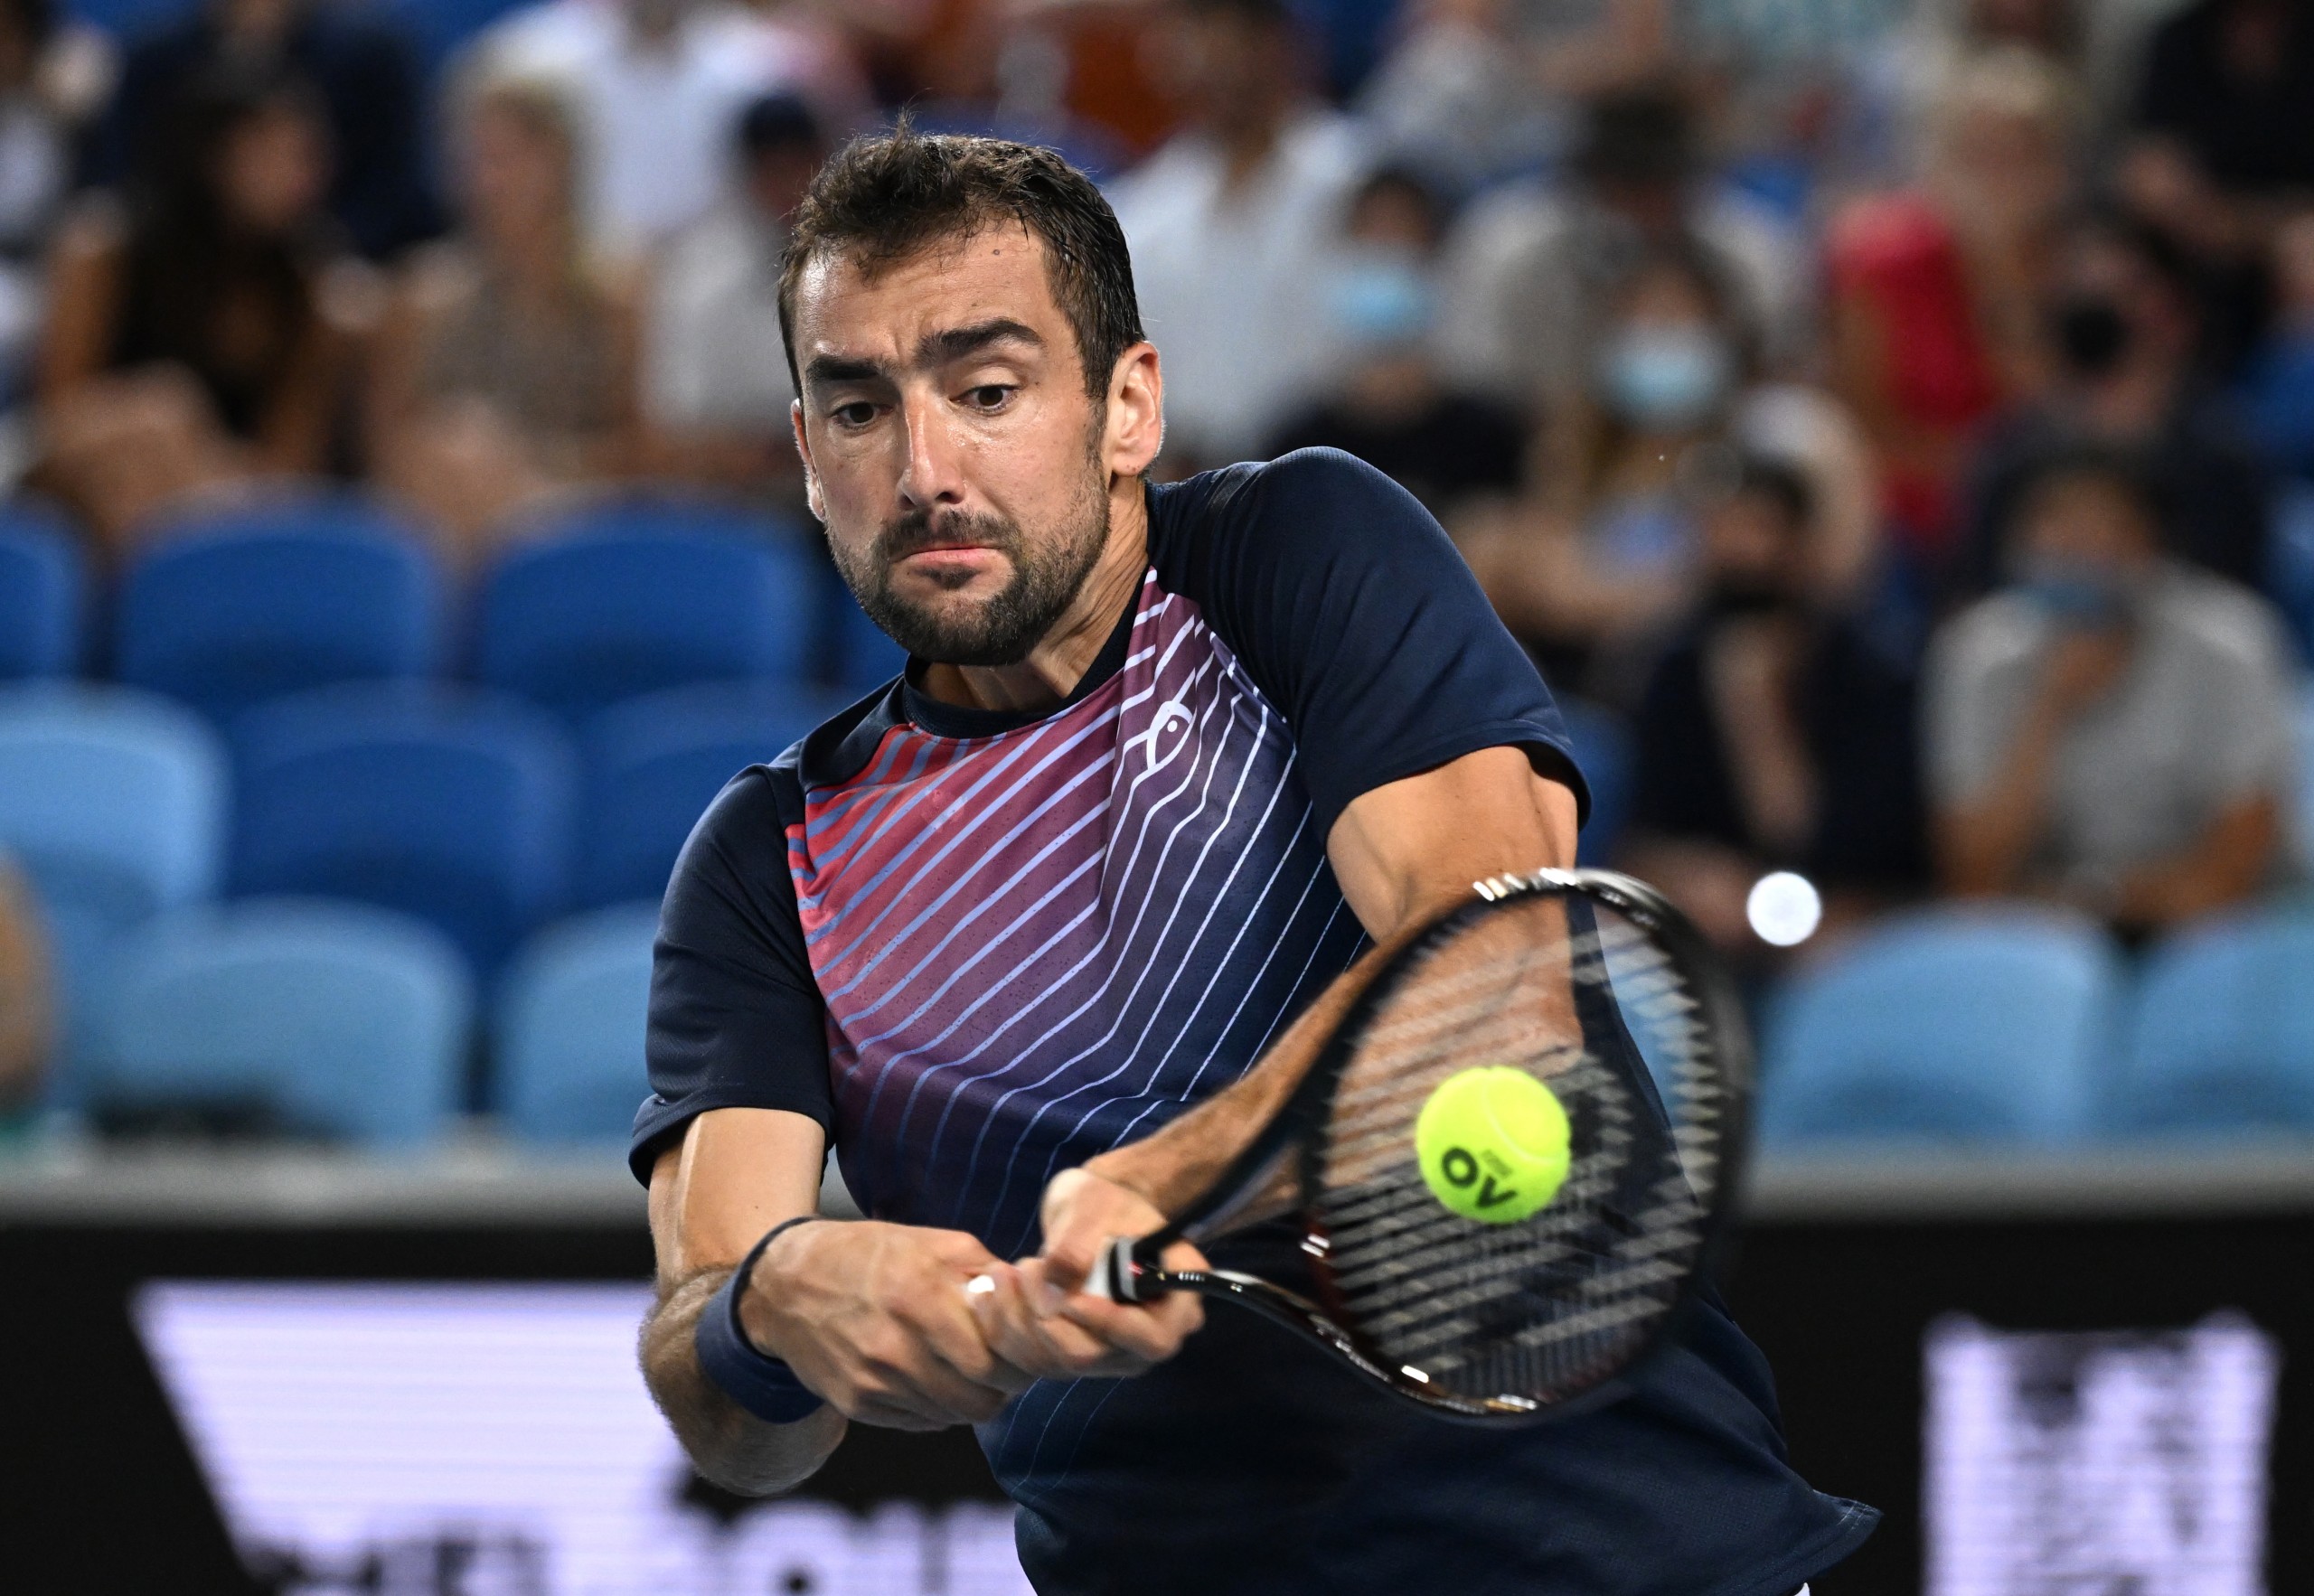 epa09701725 Marin Cilic of Croatia plays a shot during his third round match against Andrey Rublev of Russia on Day 6 of the Australian Open, at Melbourne Park, in Melbourne, Australia, 22 January 2022.  EPA/DEAN LEWINS  AUSTRALIA AND NEW ZEALAND OUT